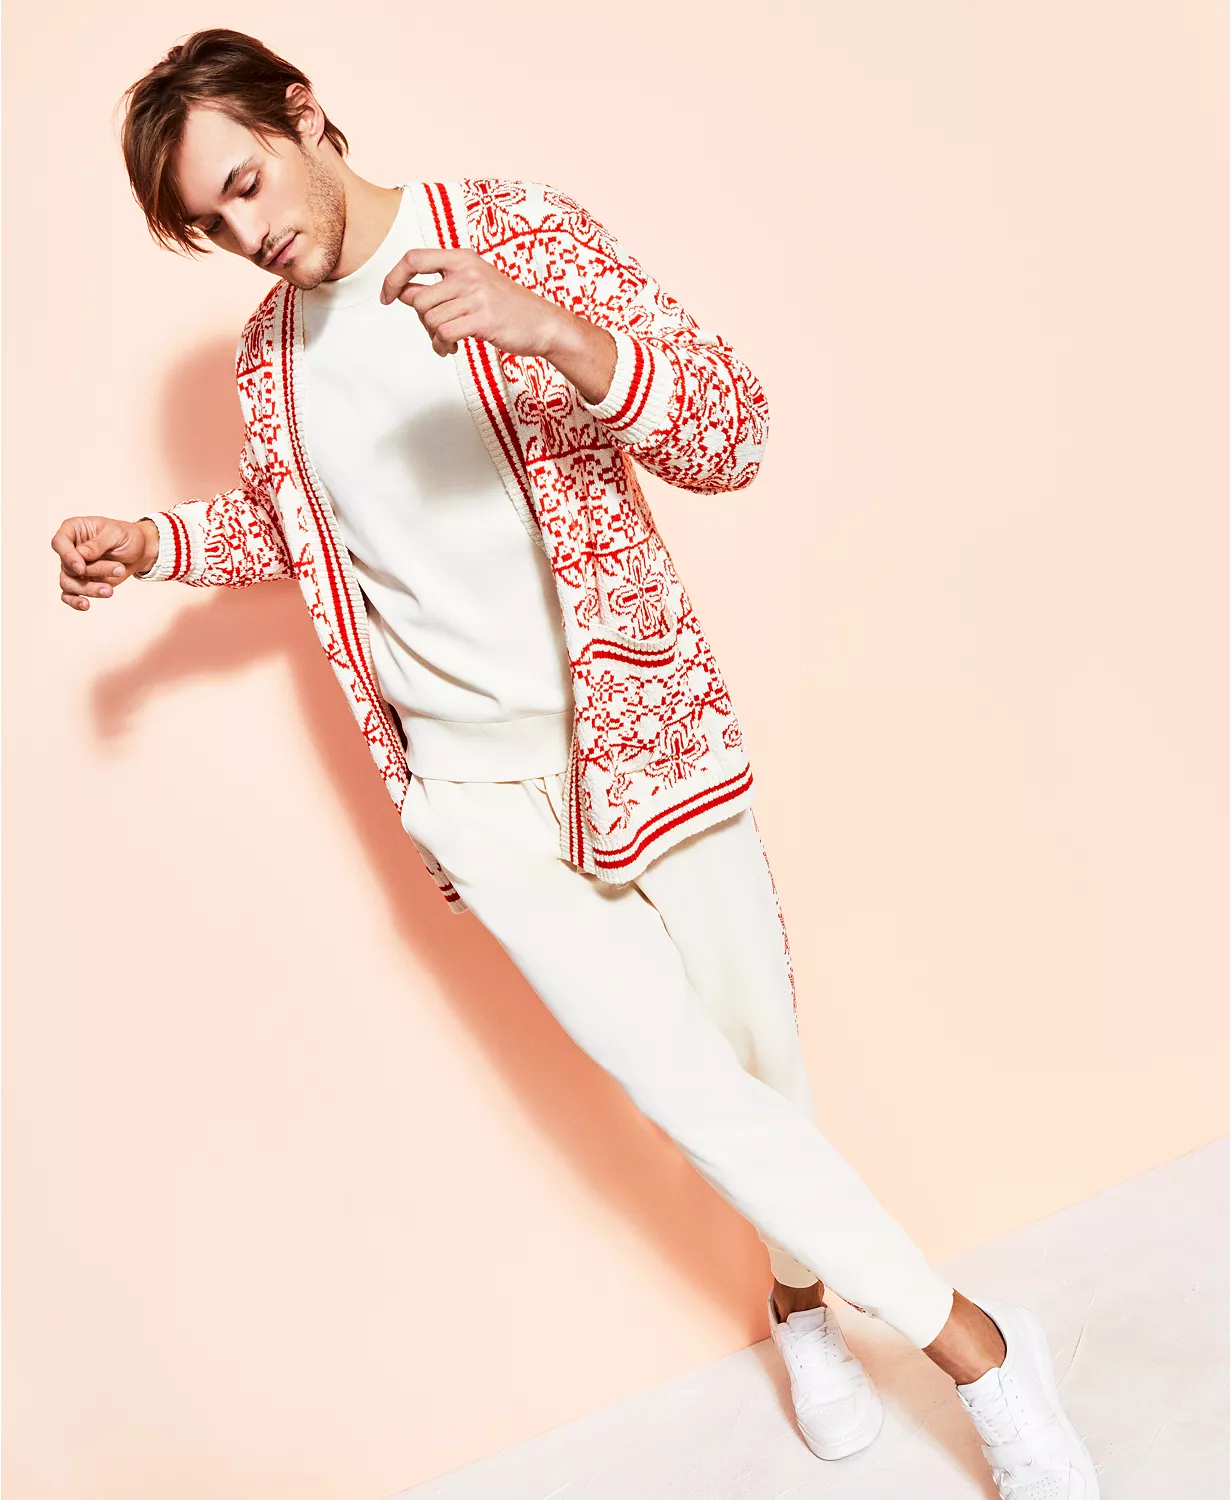 Macy's - Take some style cues from MALUMA and discover